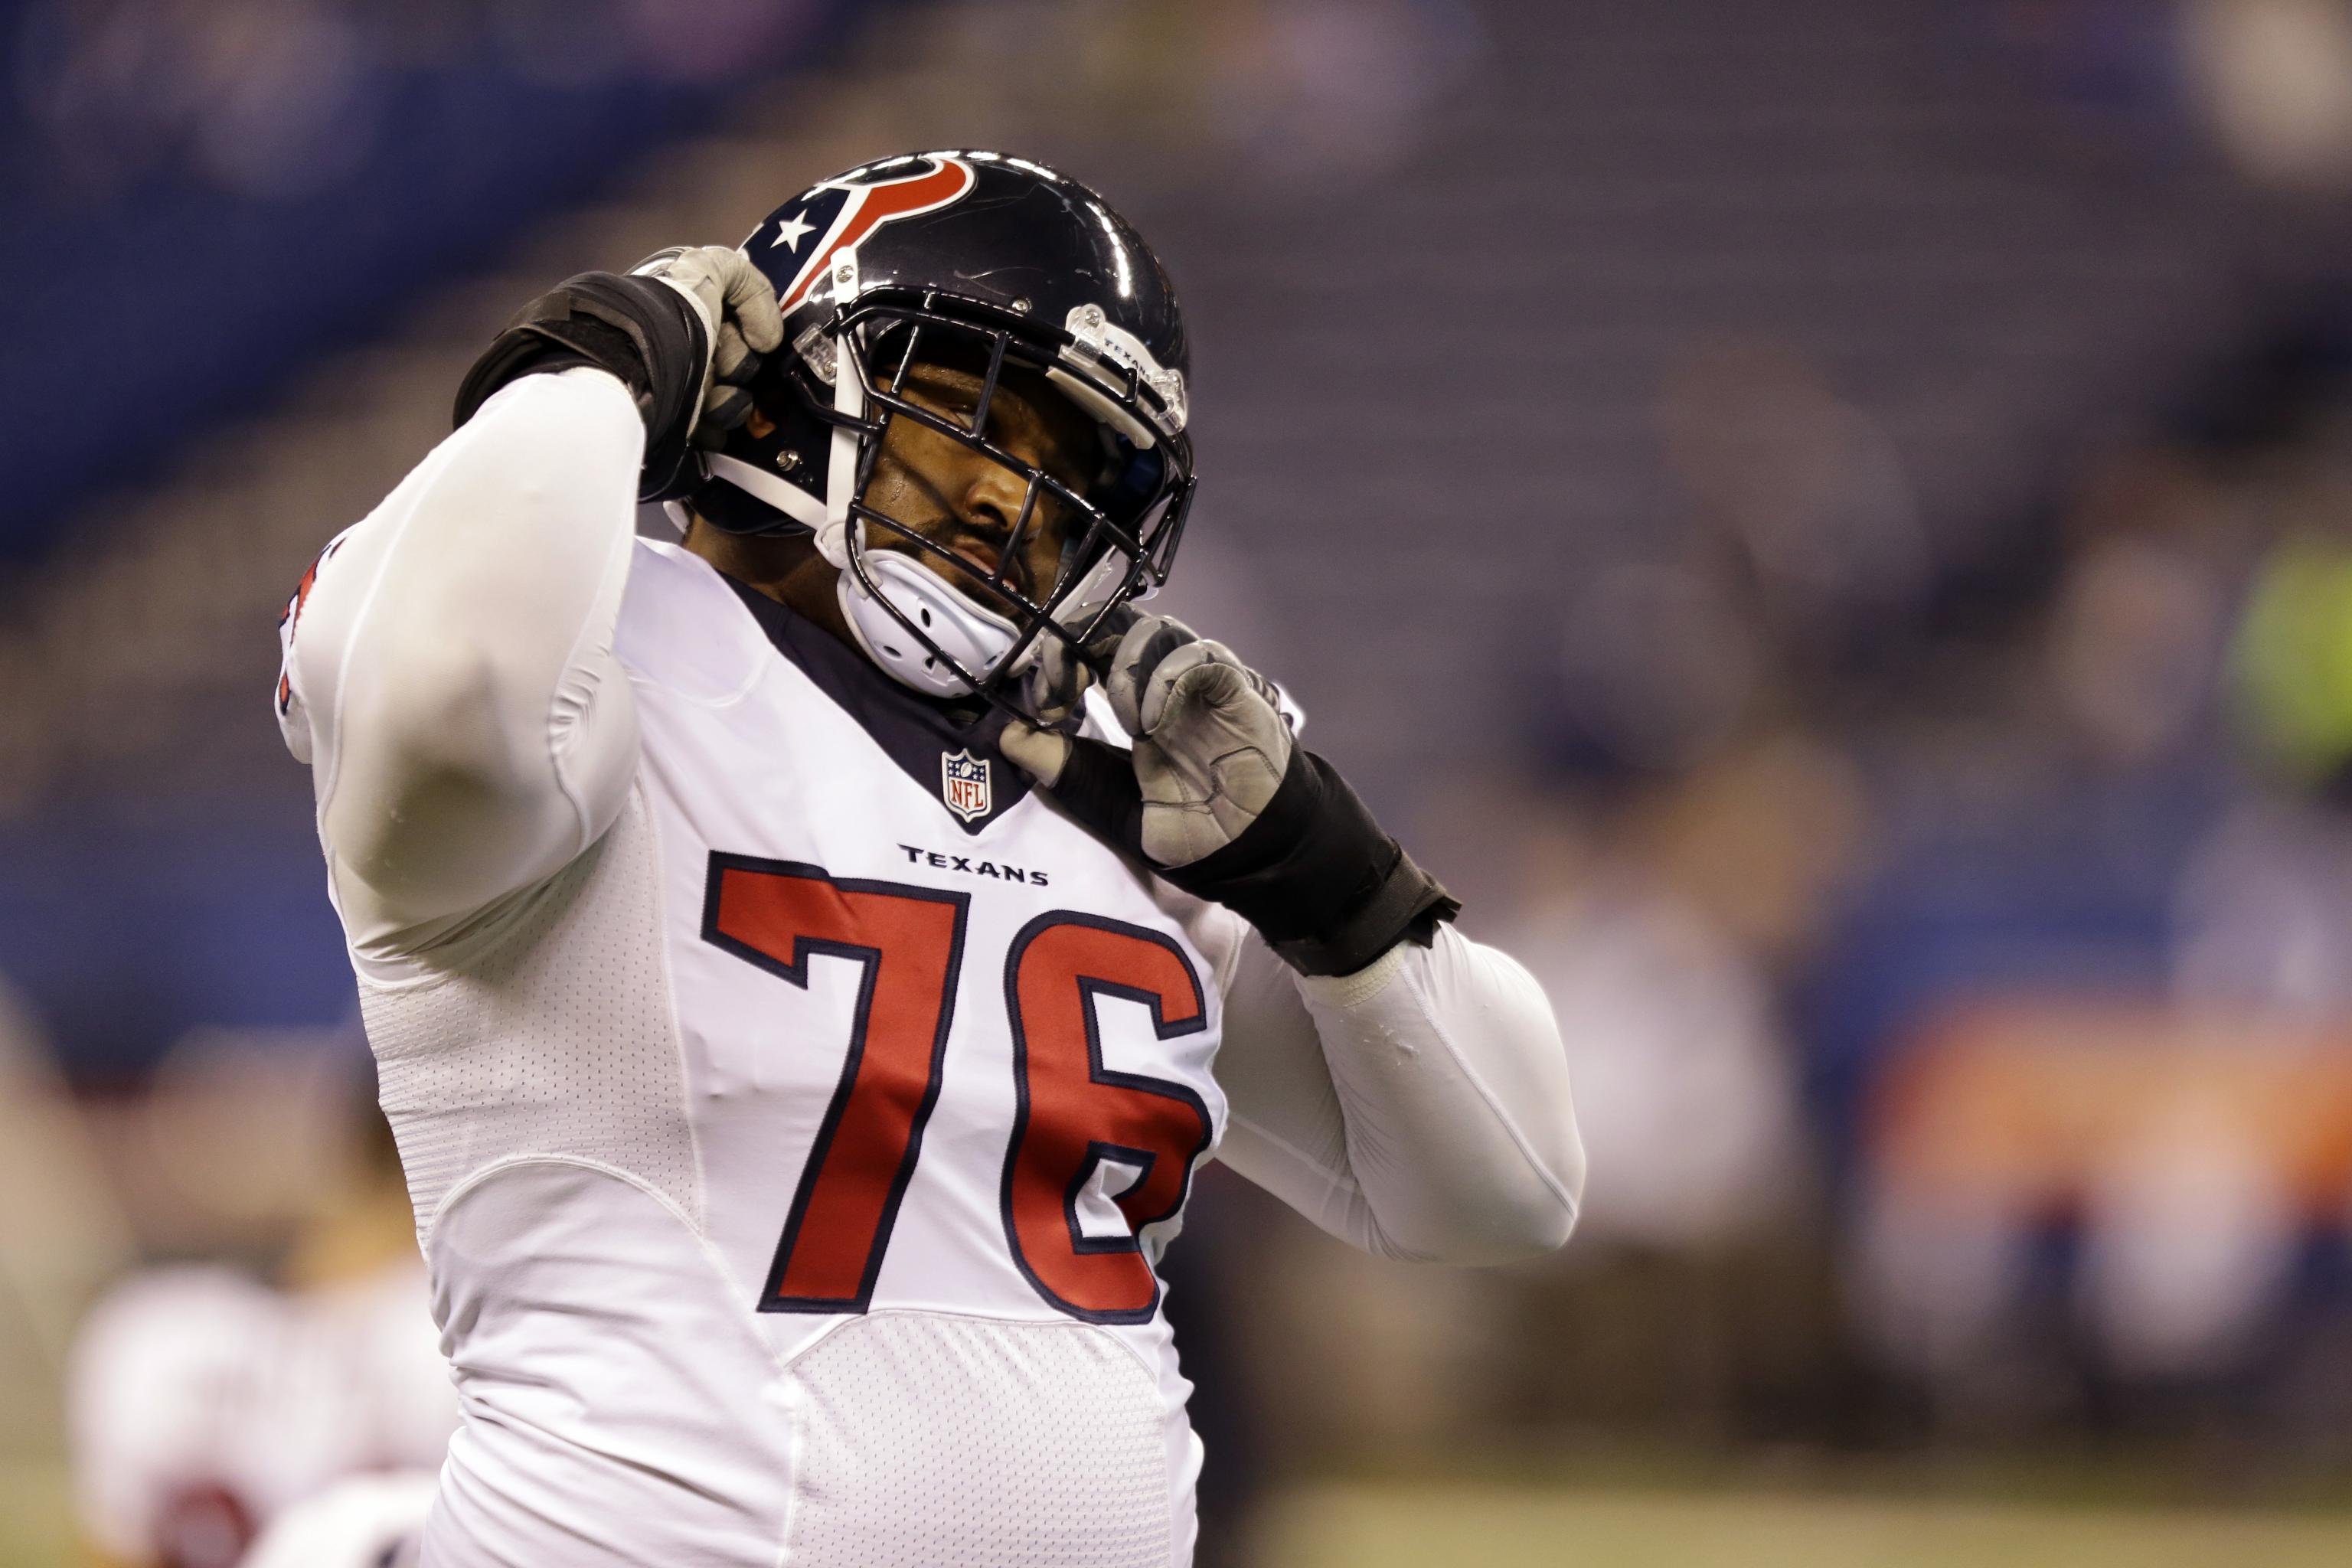 A determined Duane Brown presses on in comeback